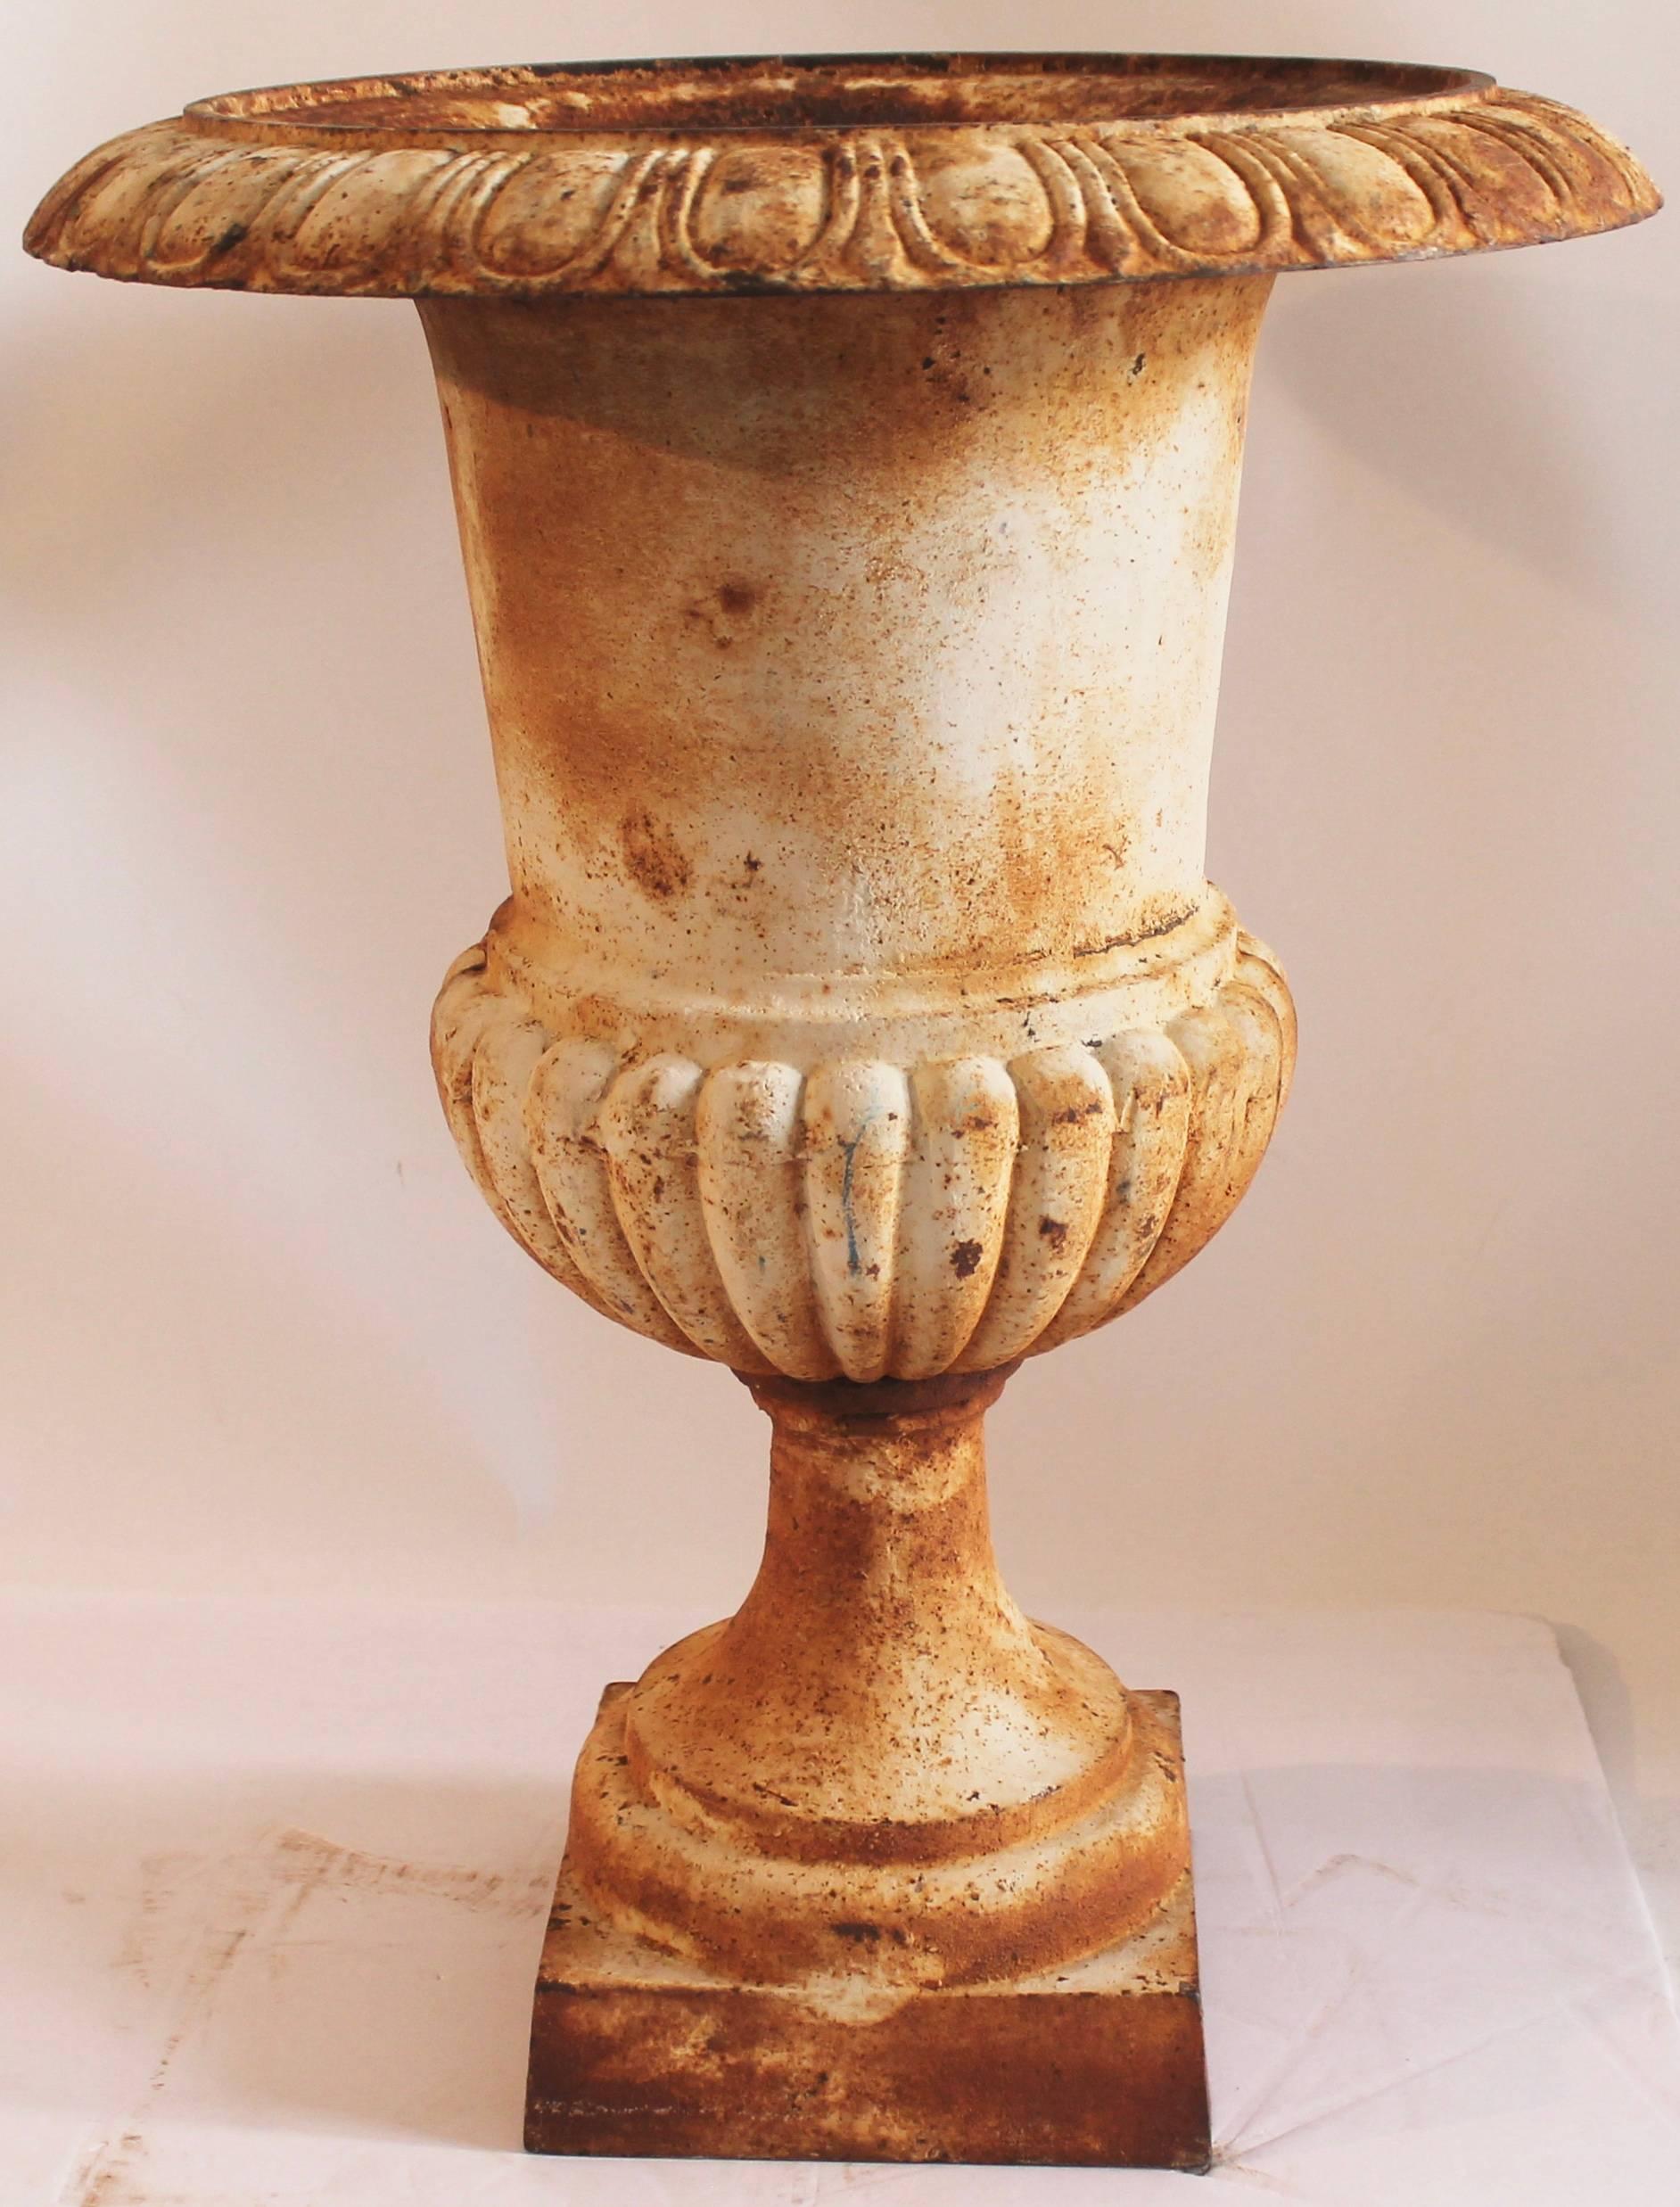 This 19th century distressed white painted monumental iron urn is in great as found condition. The fragments of white painted surface are through-out.